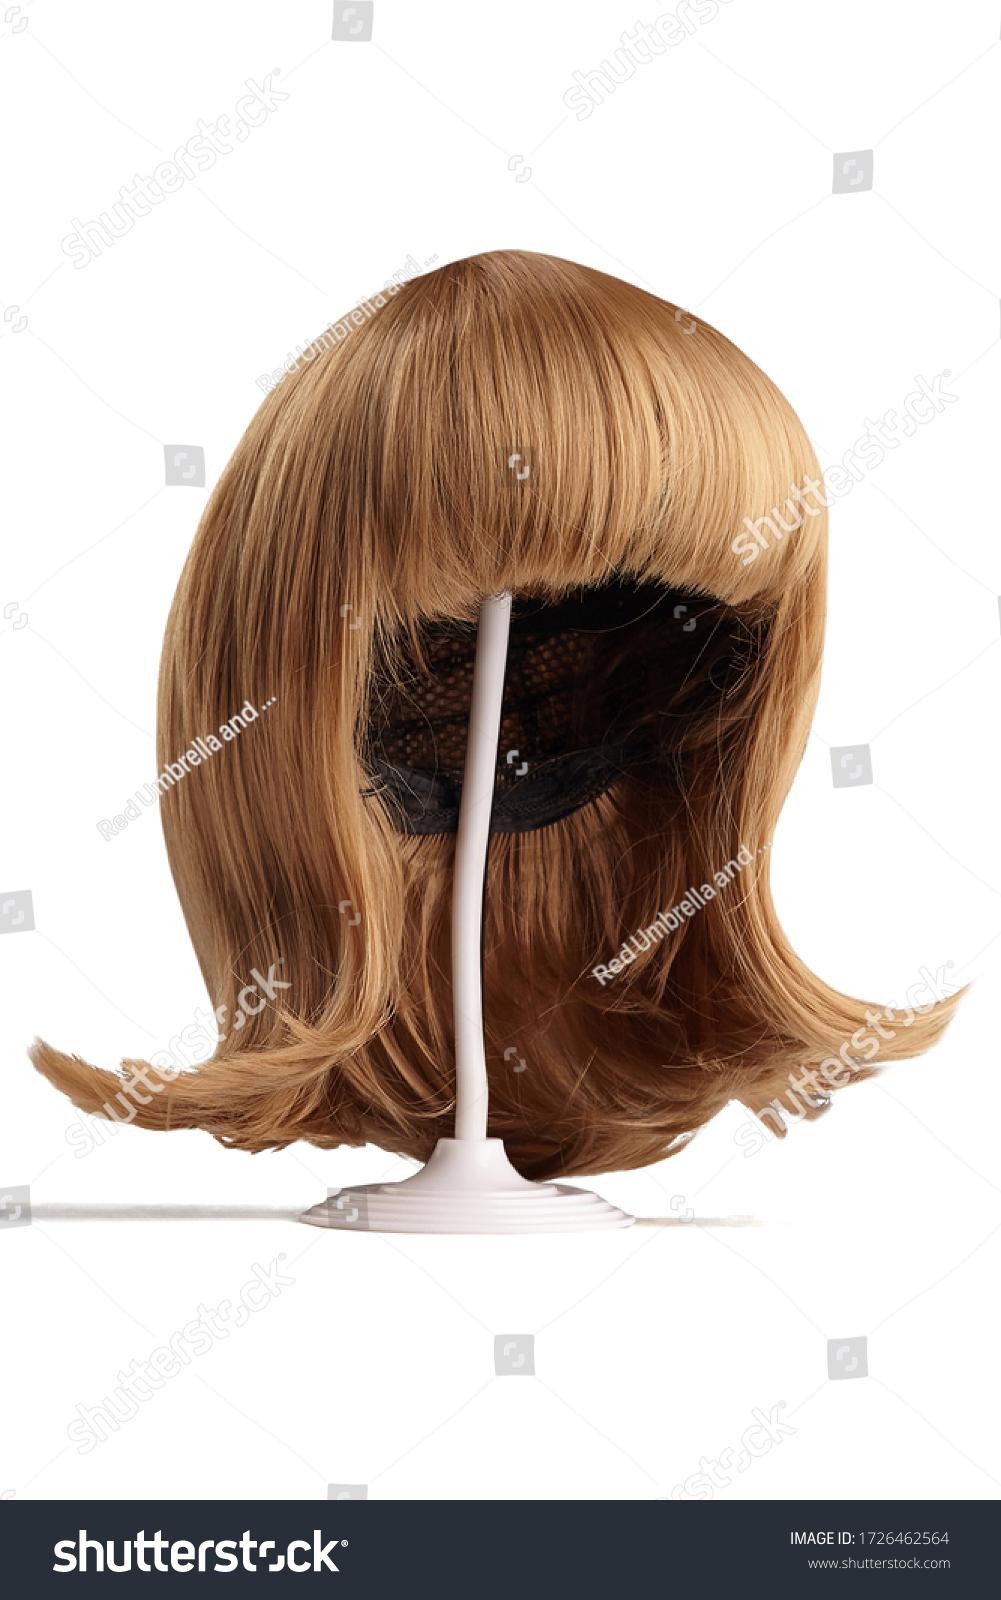 Subject shot of a natural looking blonde wig with bangs and twisted strands fixed on the white wigs holder. The stand with the wig is isolated on a white background.   #1726462564